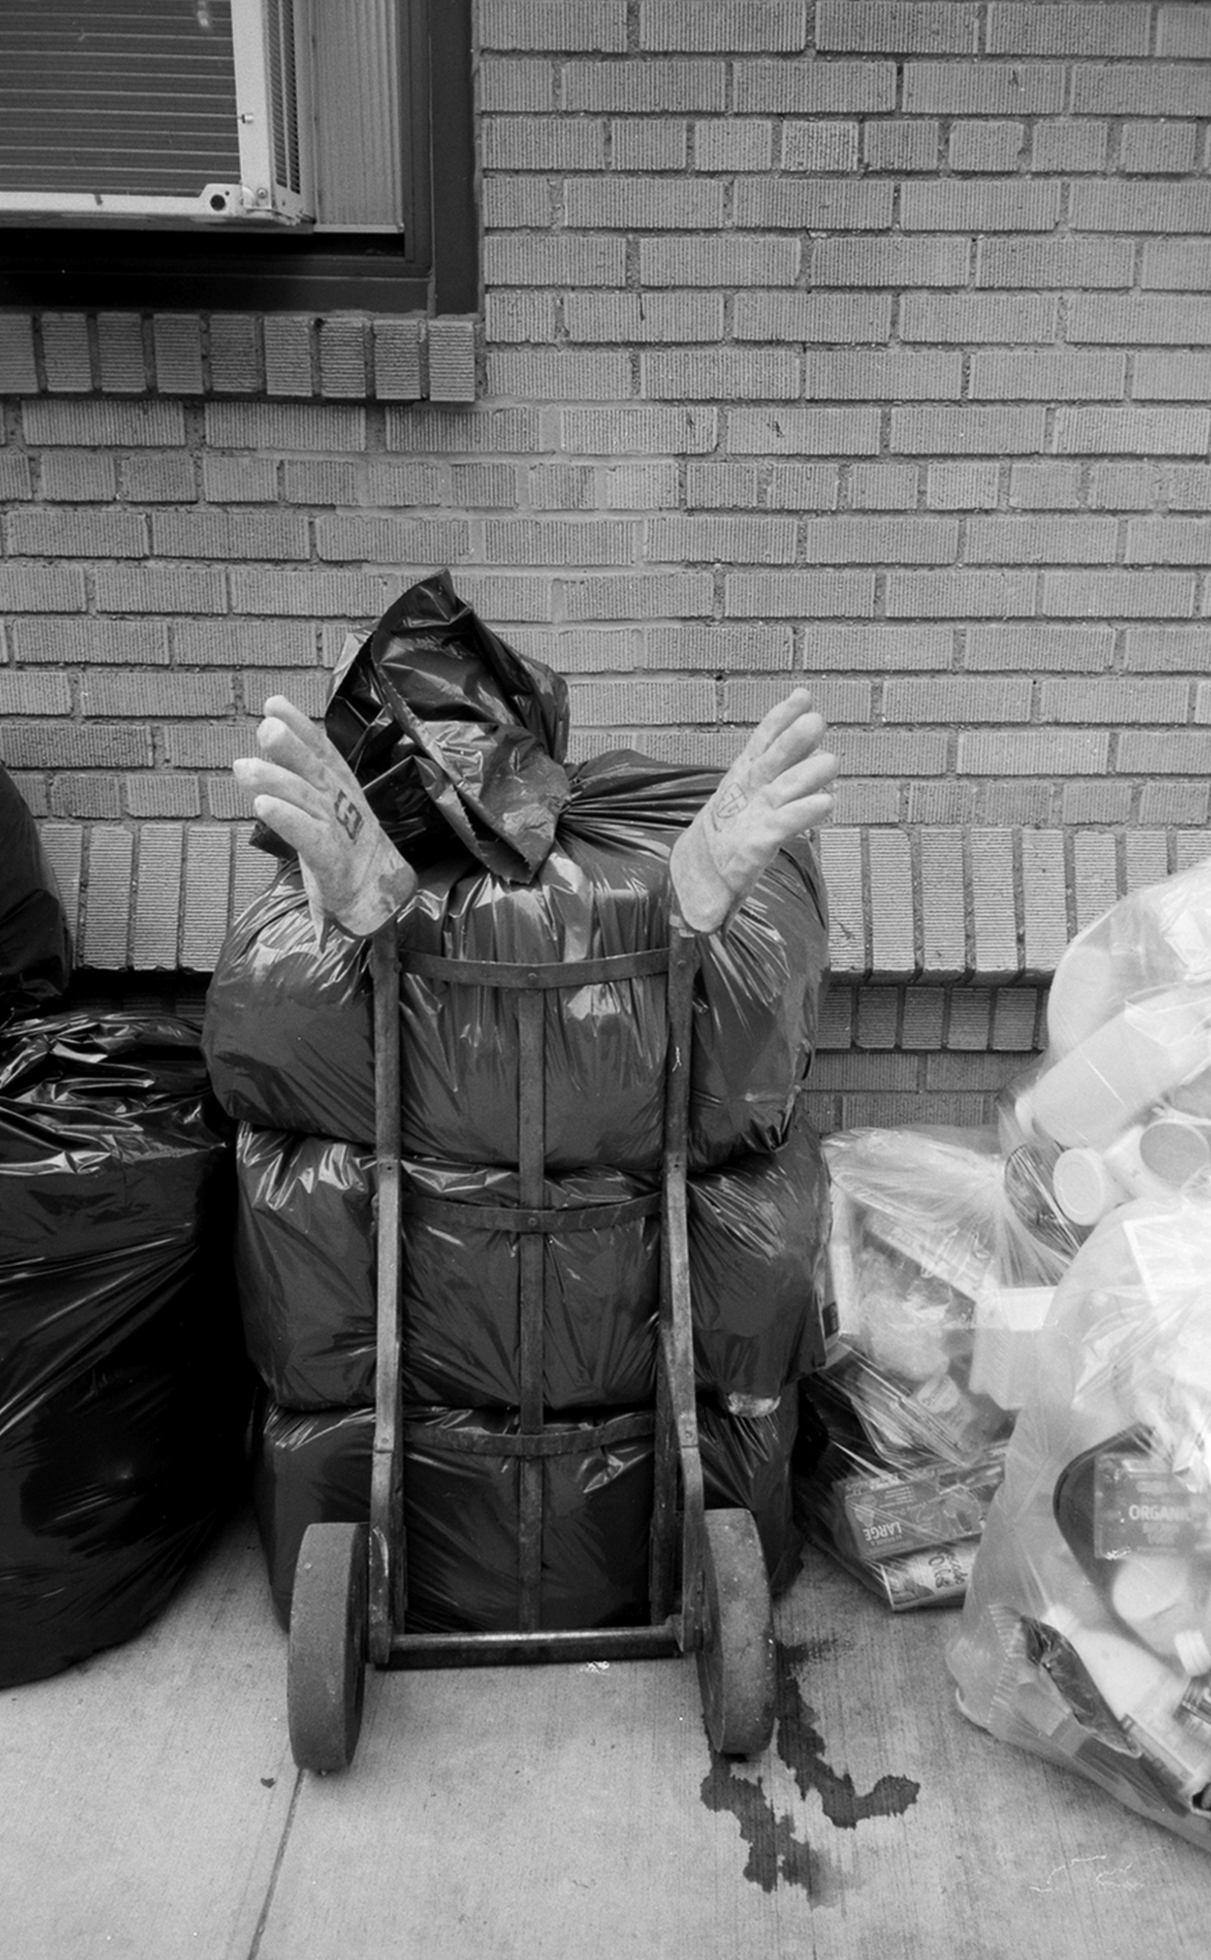 A dolly holding three trash bags is in front of a brick building. The gathered part of the topmost bag is sticking up and atop each dolly handle is a glove so that it looks like the front of a person whose head is tilted to the right.